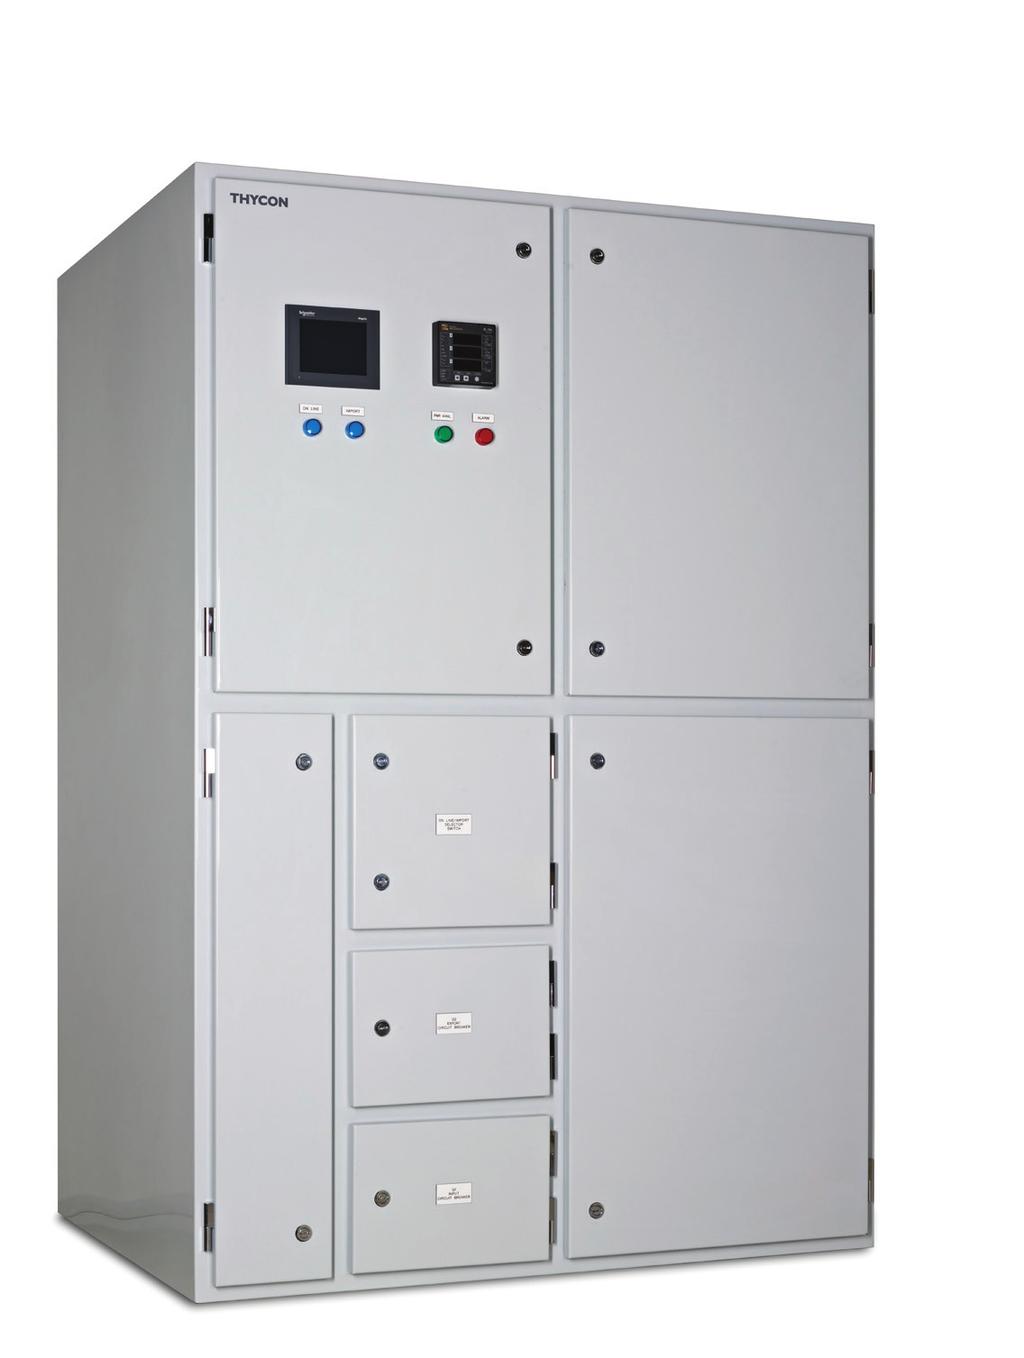 Concept The Thycon Triplen Power Distribution Unit (TPDU) is designed to correct any third harmonic content on the current waveform while providing electrical isolation, voltage transformation and